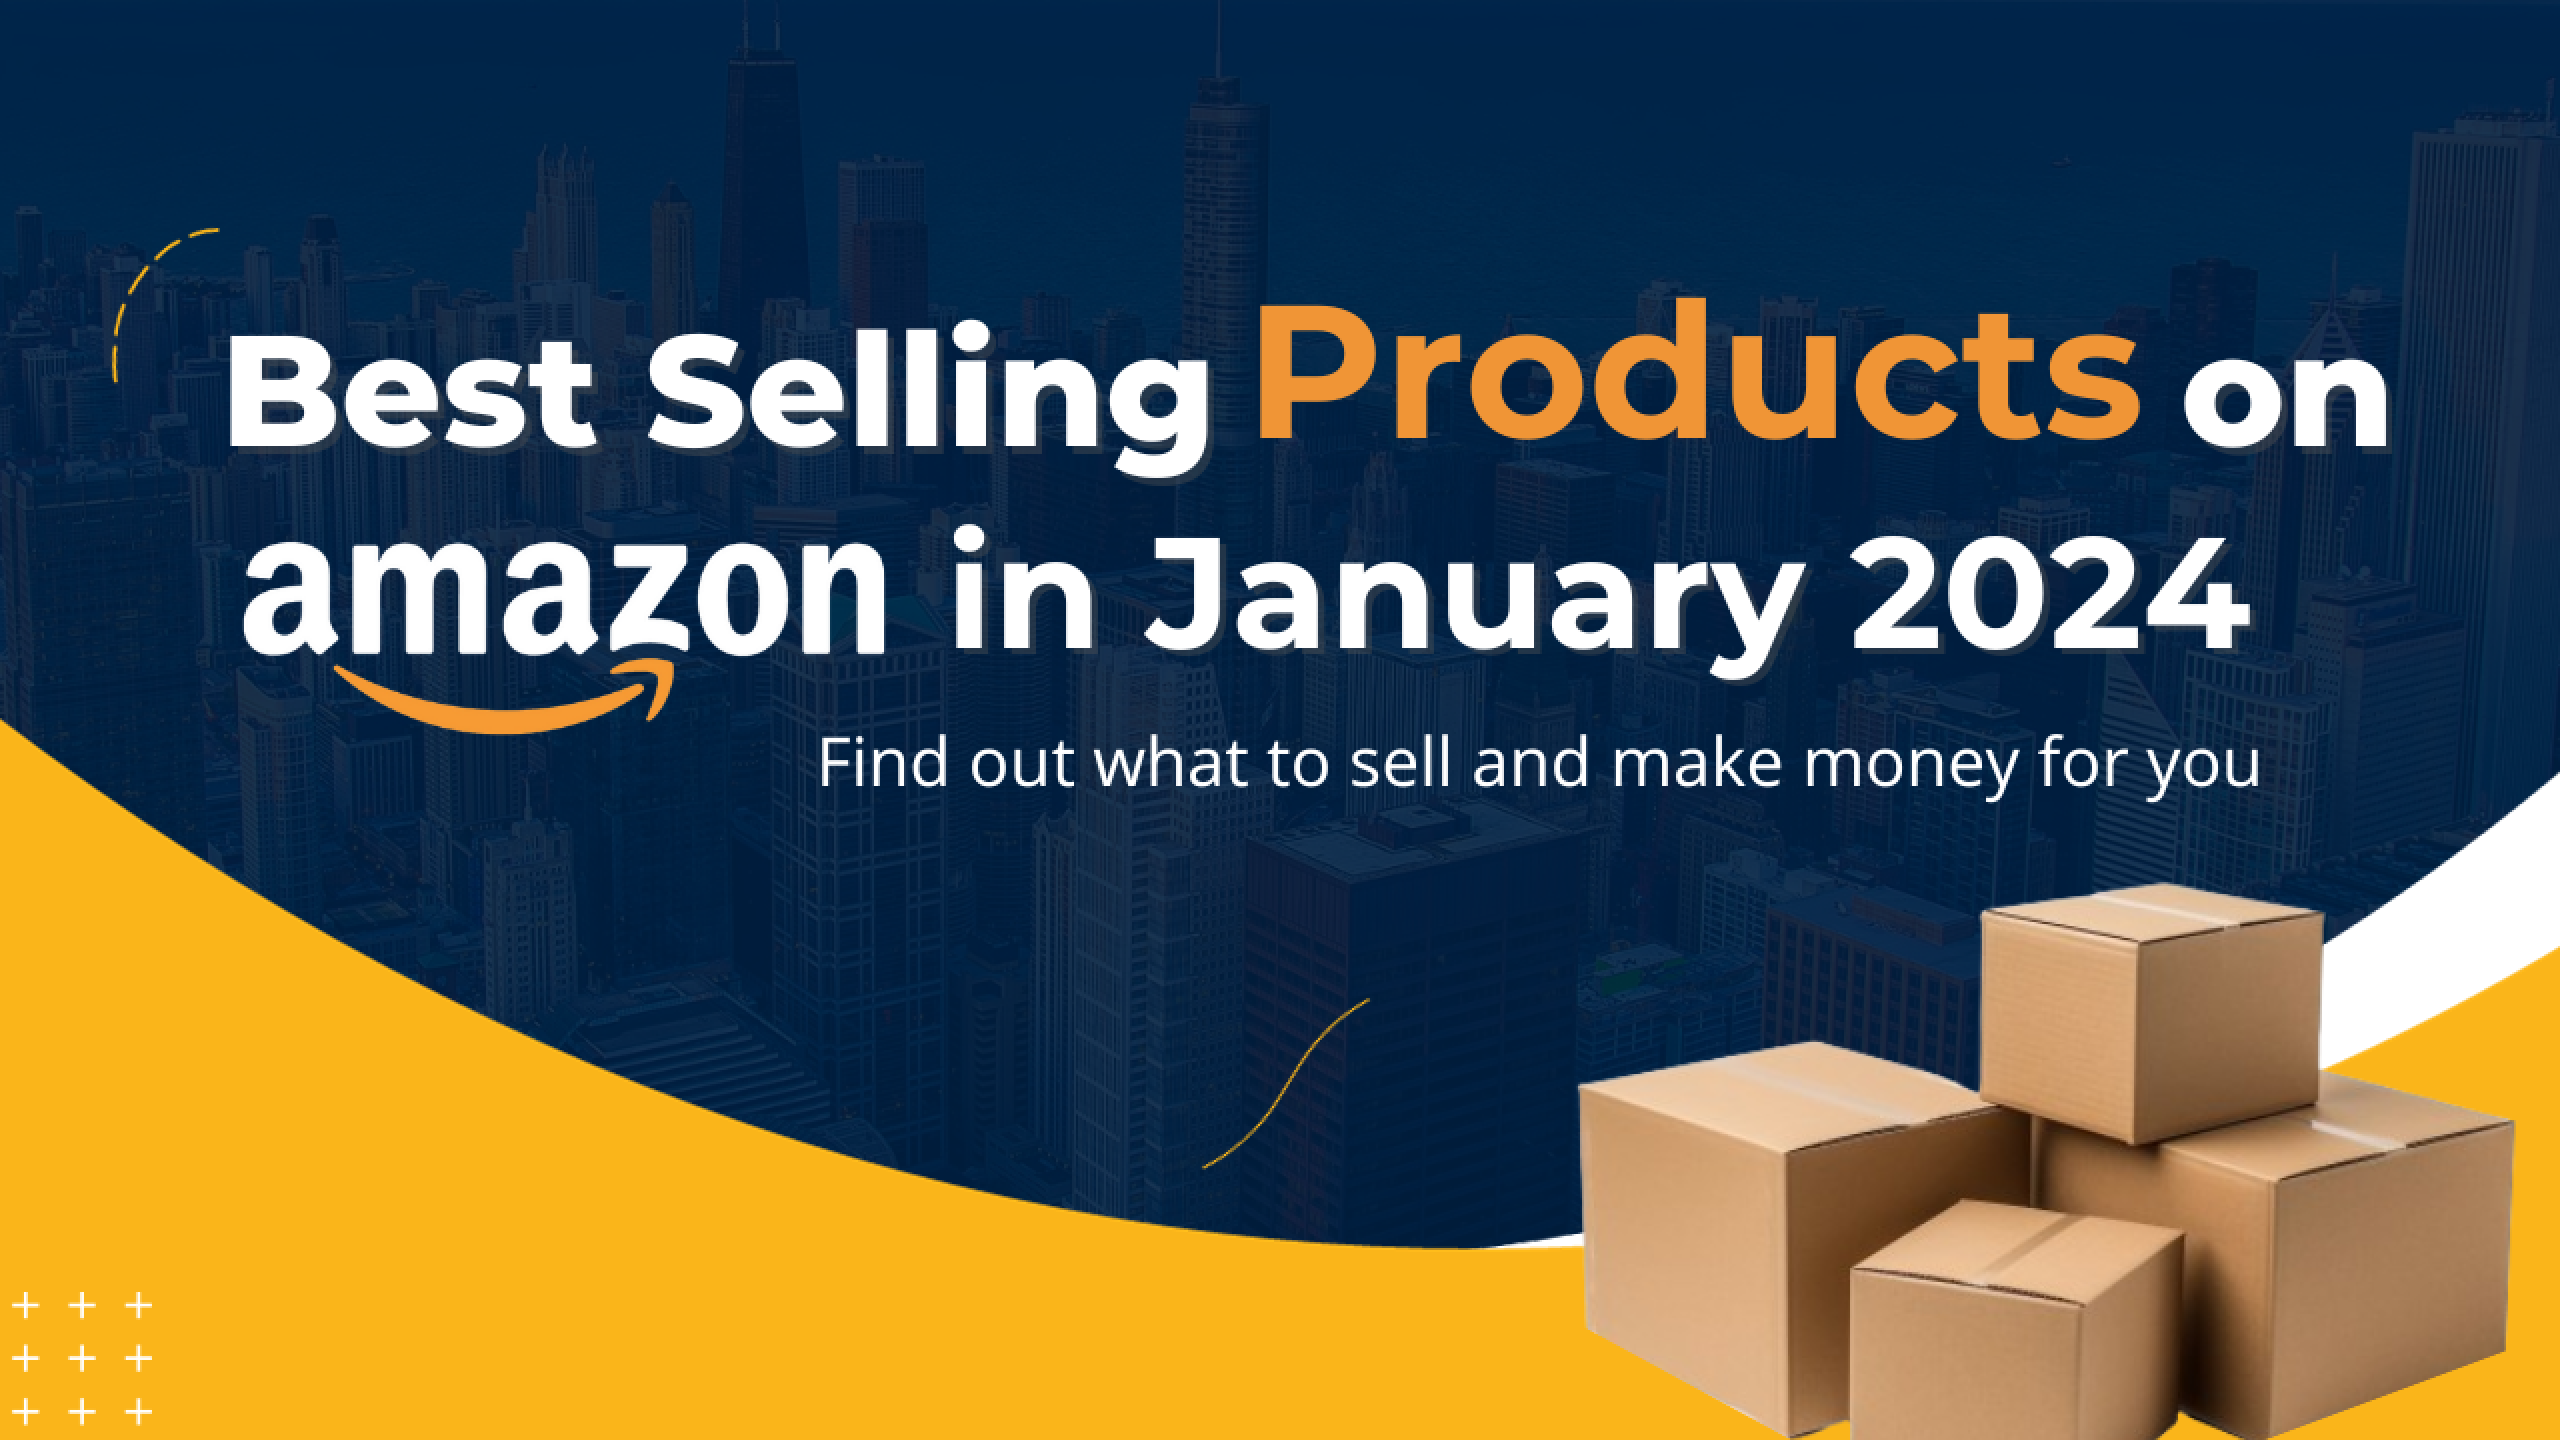 https://www.tool4seller.com/wp-content/uploads/2024/01/Best-selling-products-on-Amazon-in-January-2024-Find-out-What-to-Sell-and-Make-Money-for-You.png